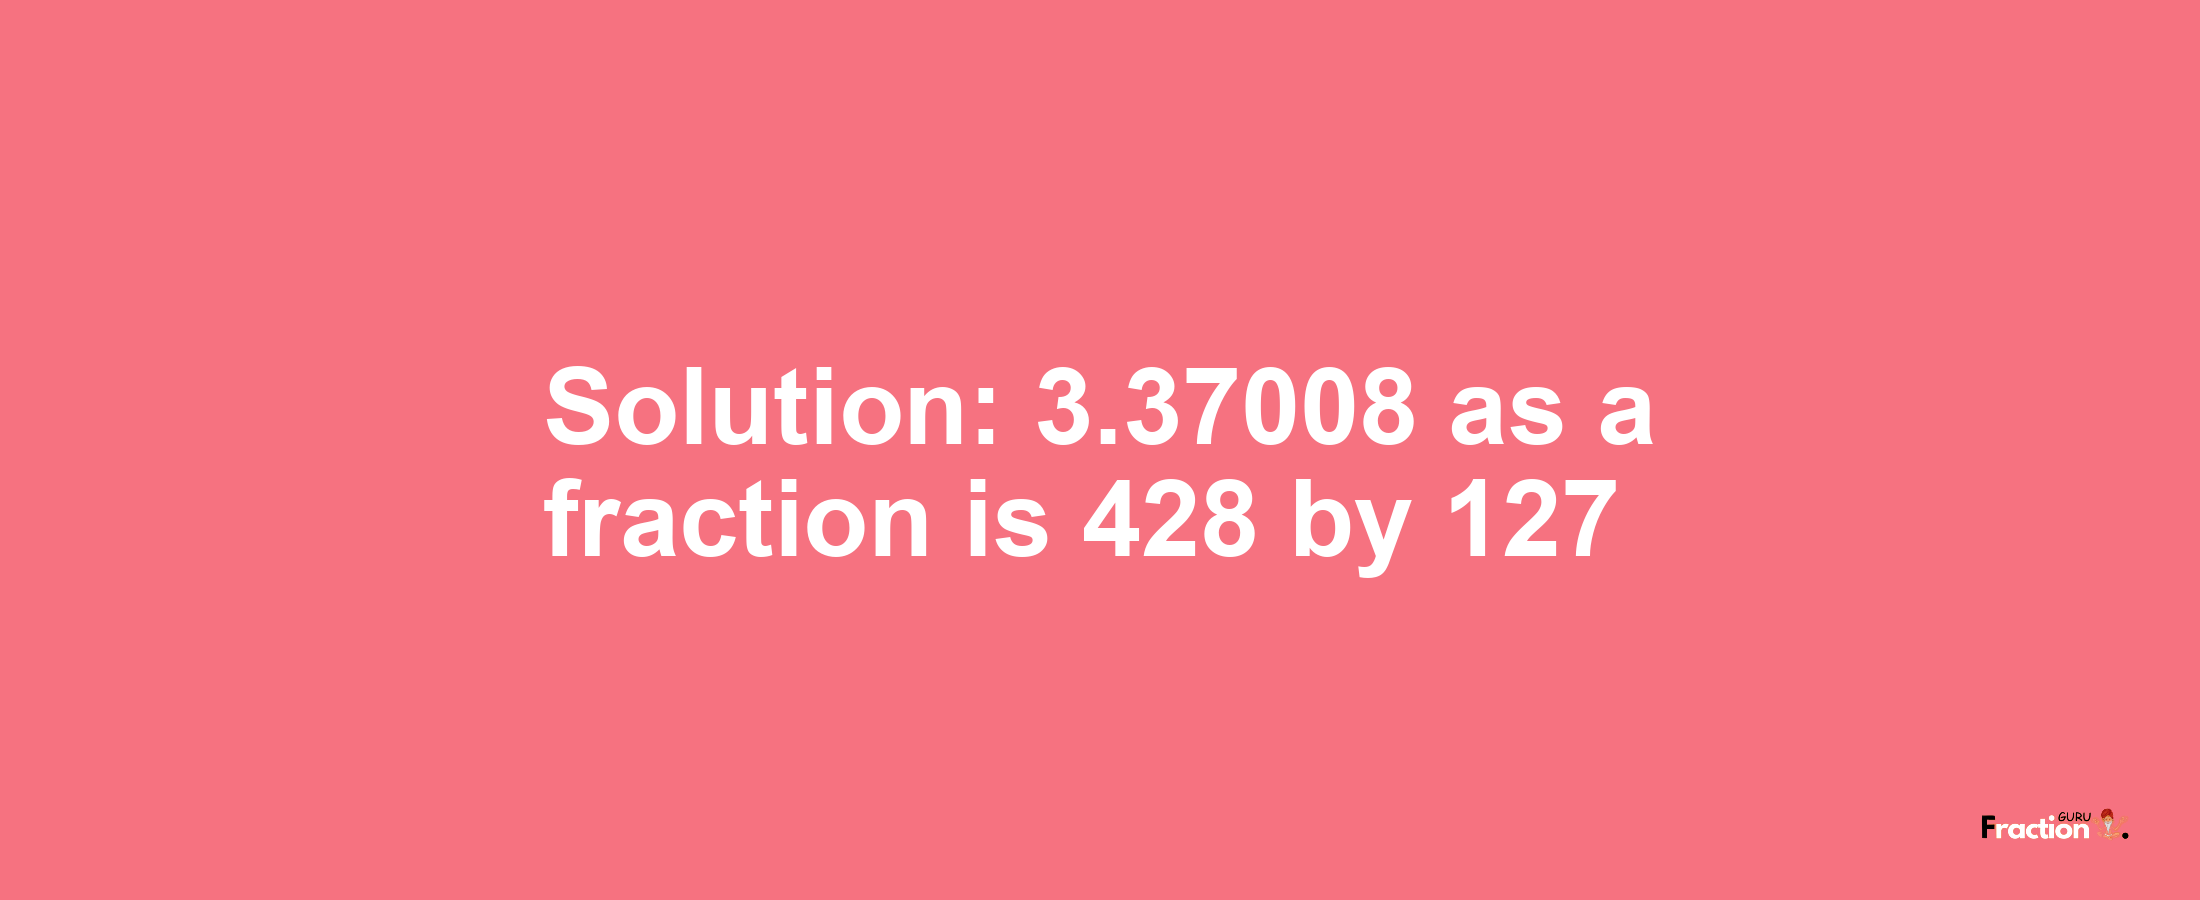 Solution:3.37008 as a fraction is 428/127